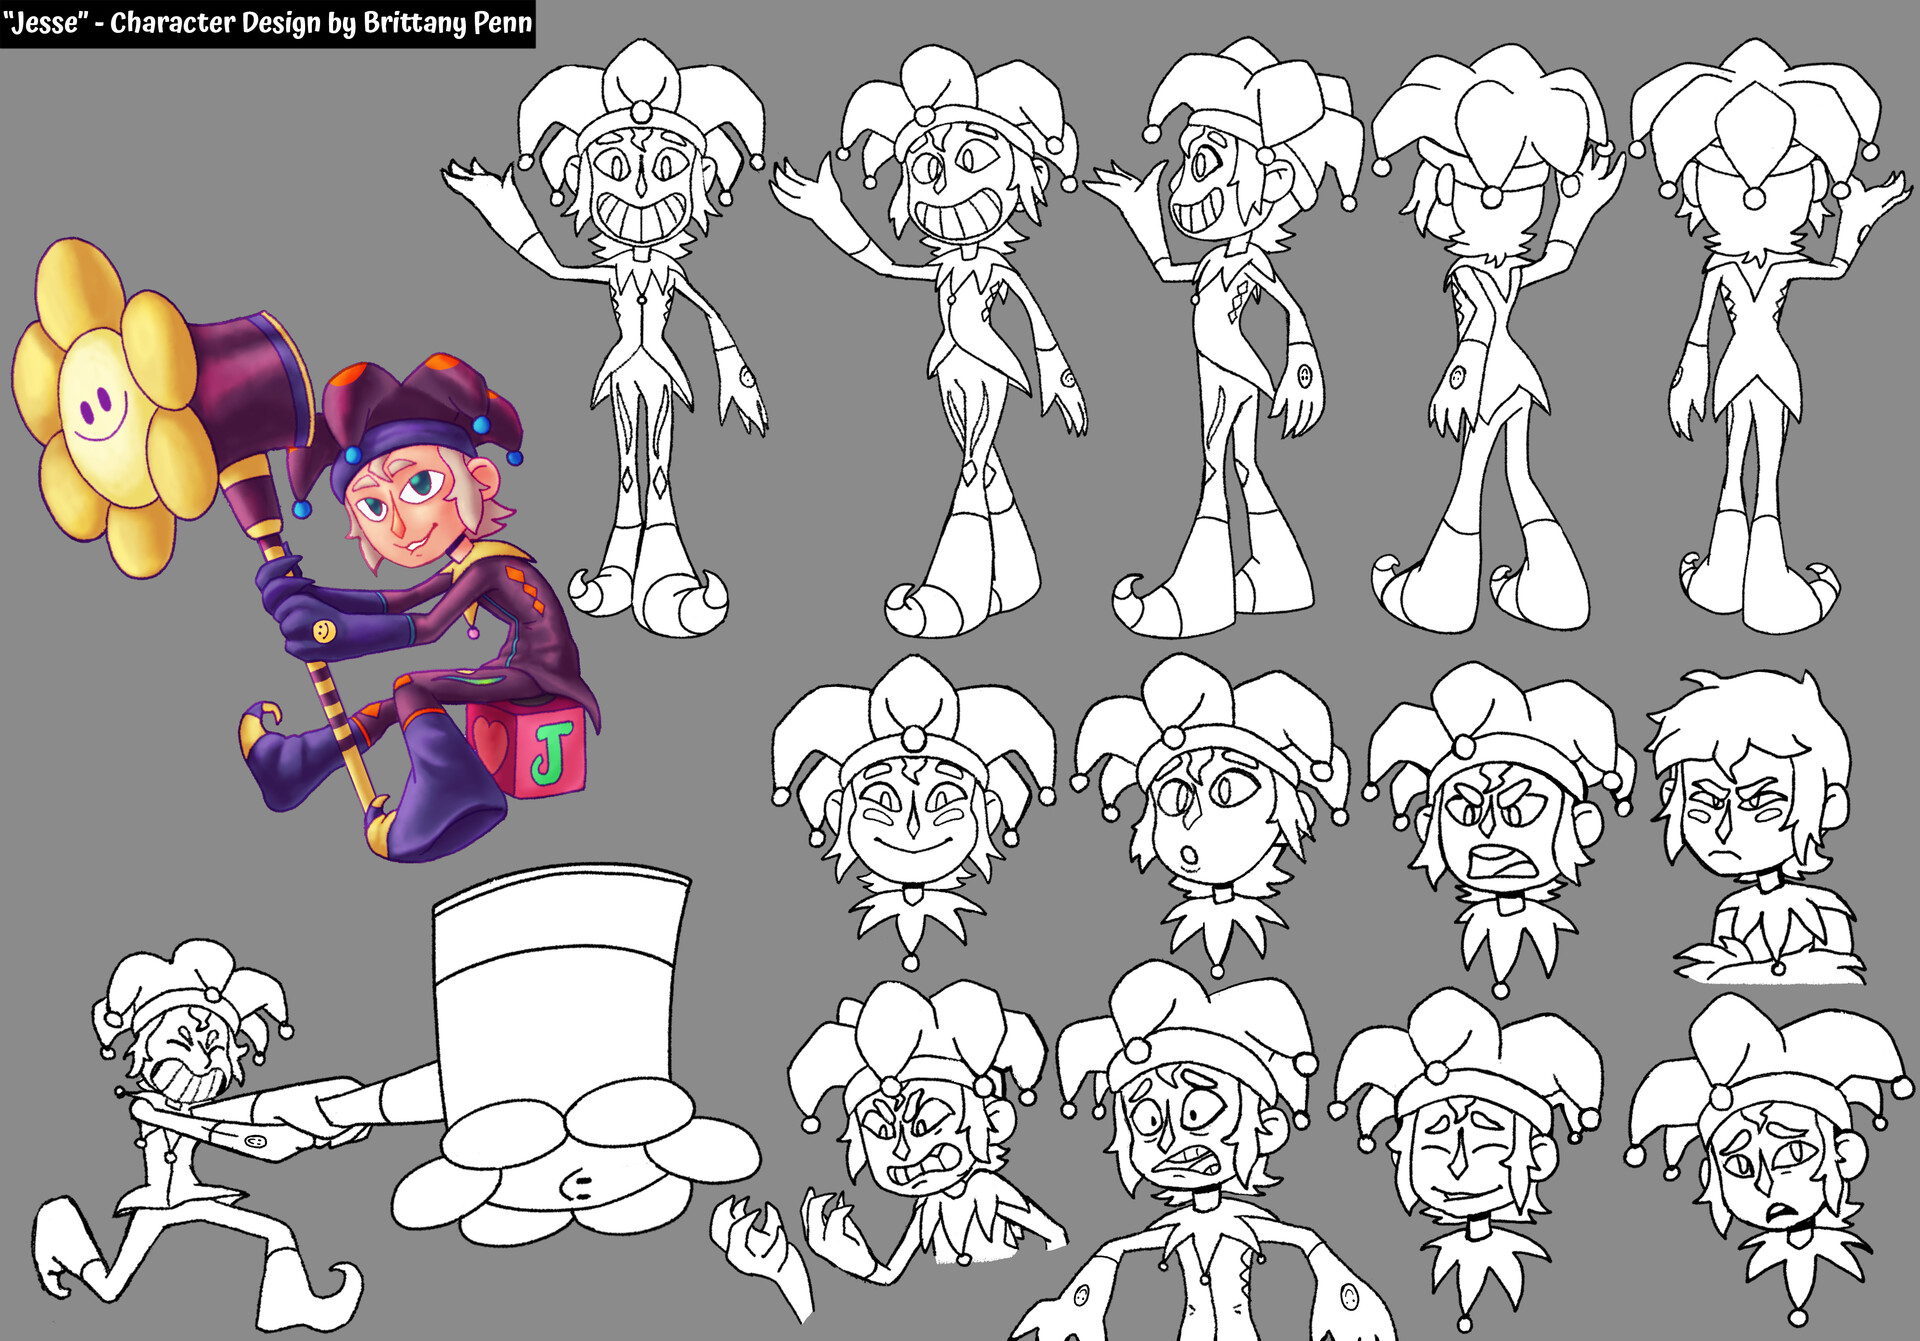 Blue Hair Jester Character Design - wide 6